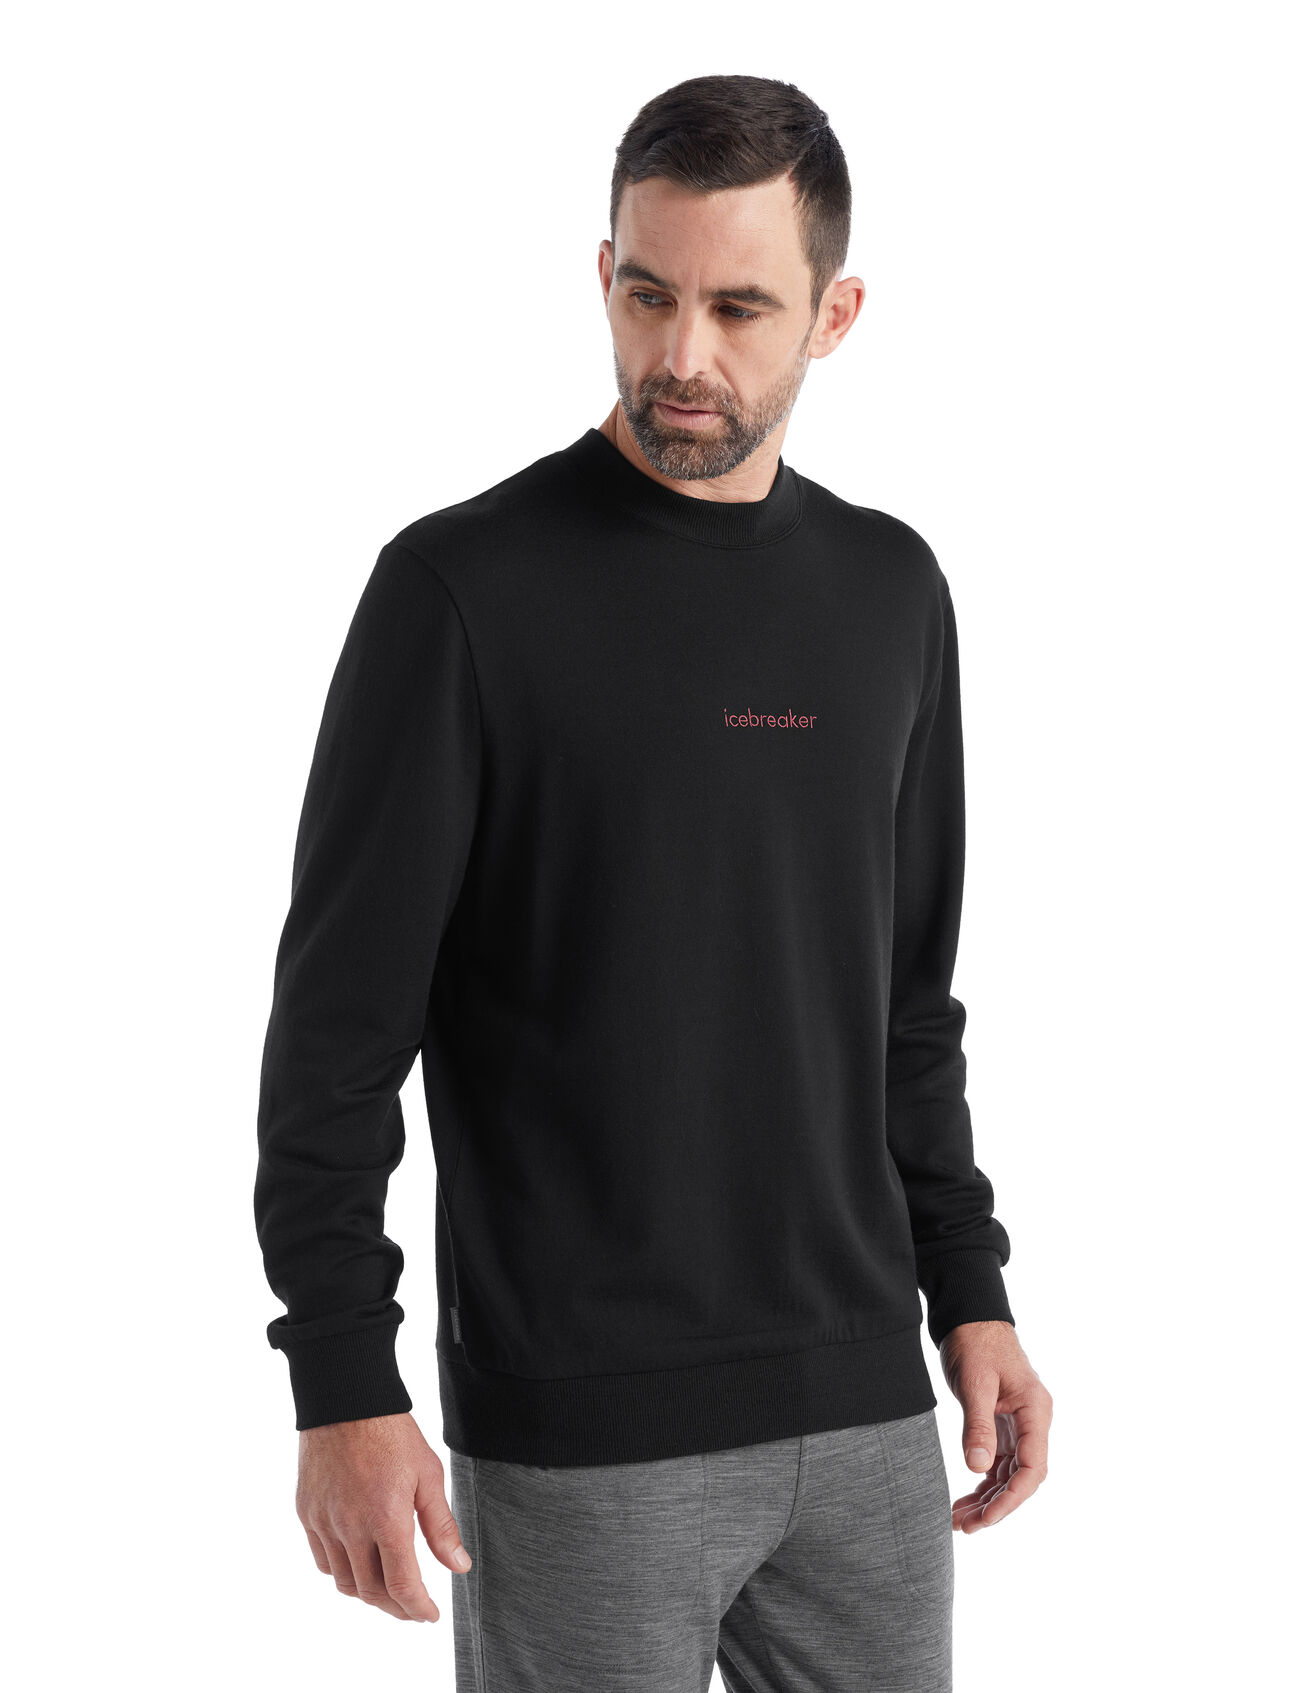 Mens Merino Trailscape Long Sleeve Sweatshirt Pure Heights An everyday merino sweatshirt featuring a retro-inspired print, the Trailscape Long Sleeve Sweatshirt Pure Heights features a 100% merino wool body for natural breathability and incredible comfort.